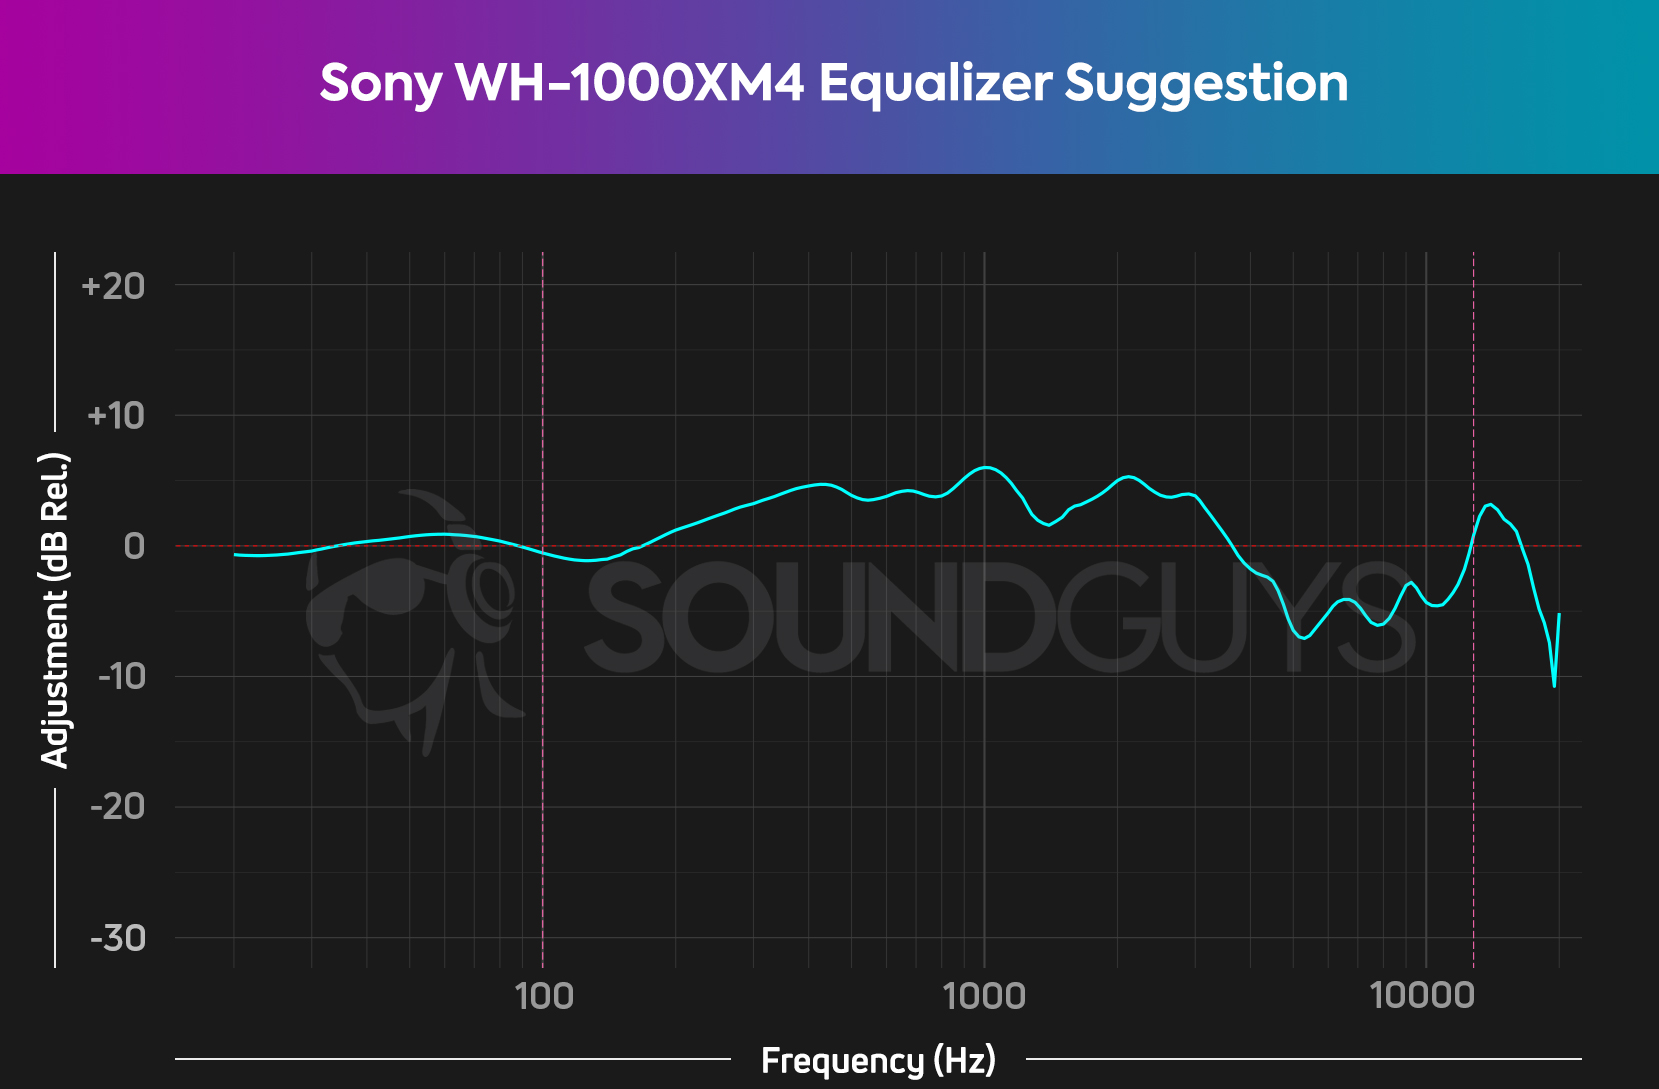 SoundGuys recommends boosting the 200Hz to 2kHz sliders up by about 5dB, while dropping the 5kHz to 9kHz sliders to -5dB.